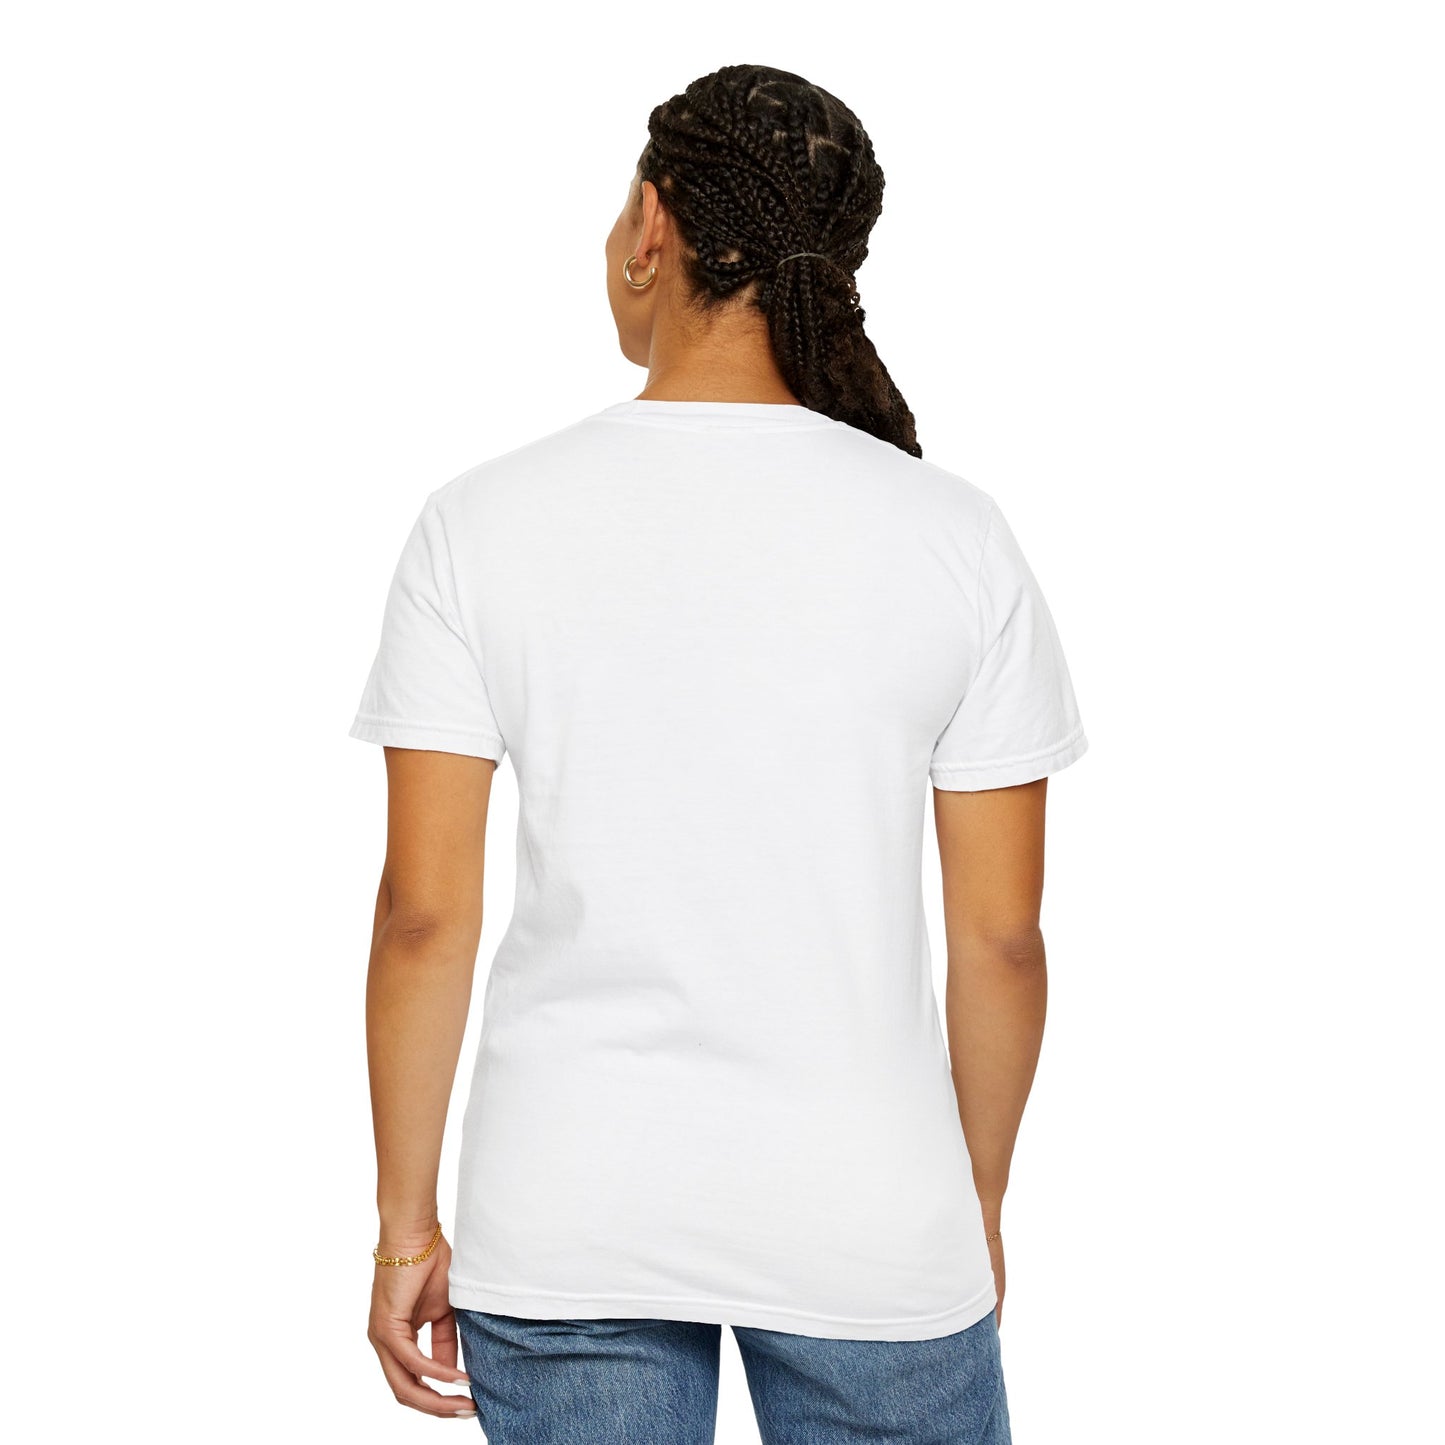 No need to repeat yourself - Unisex Garment-Dyed T-shirt